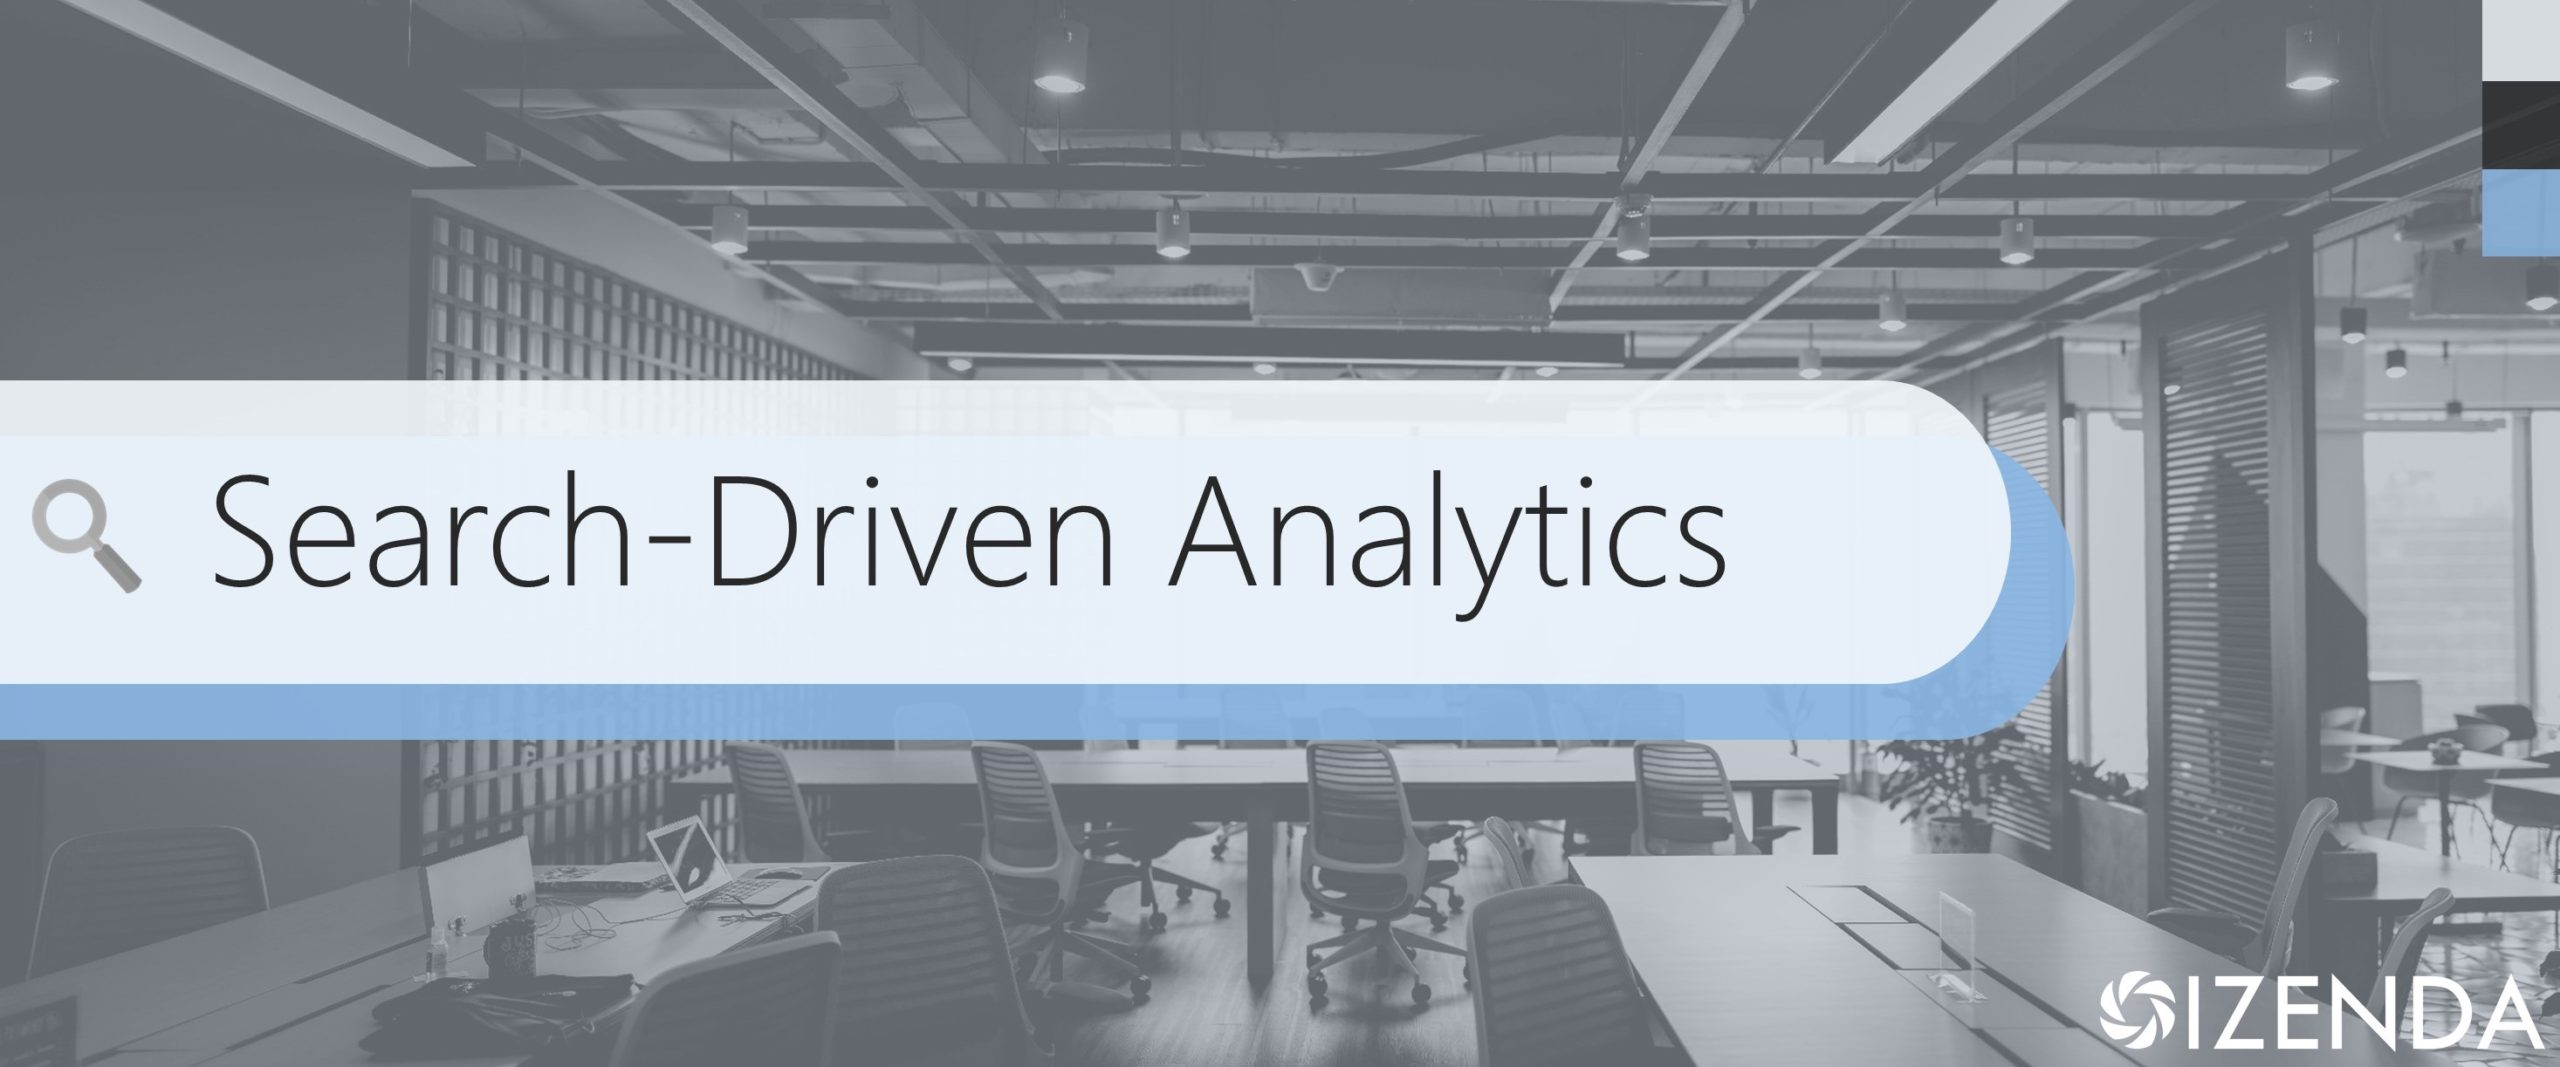 search driven analytics